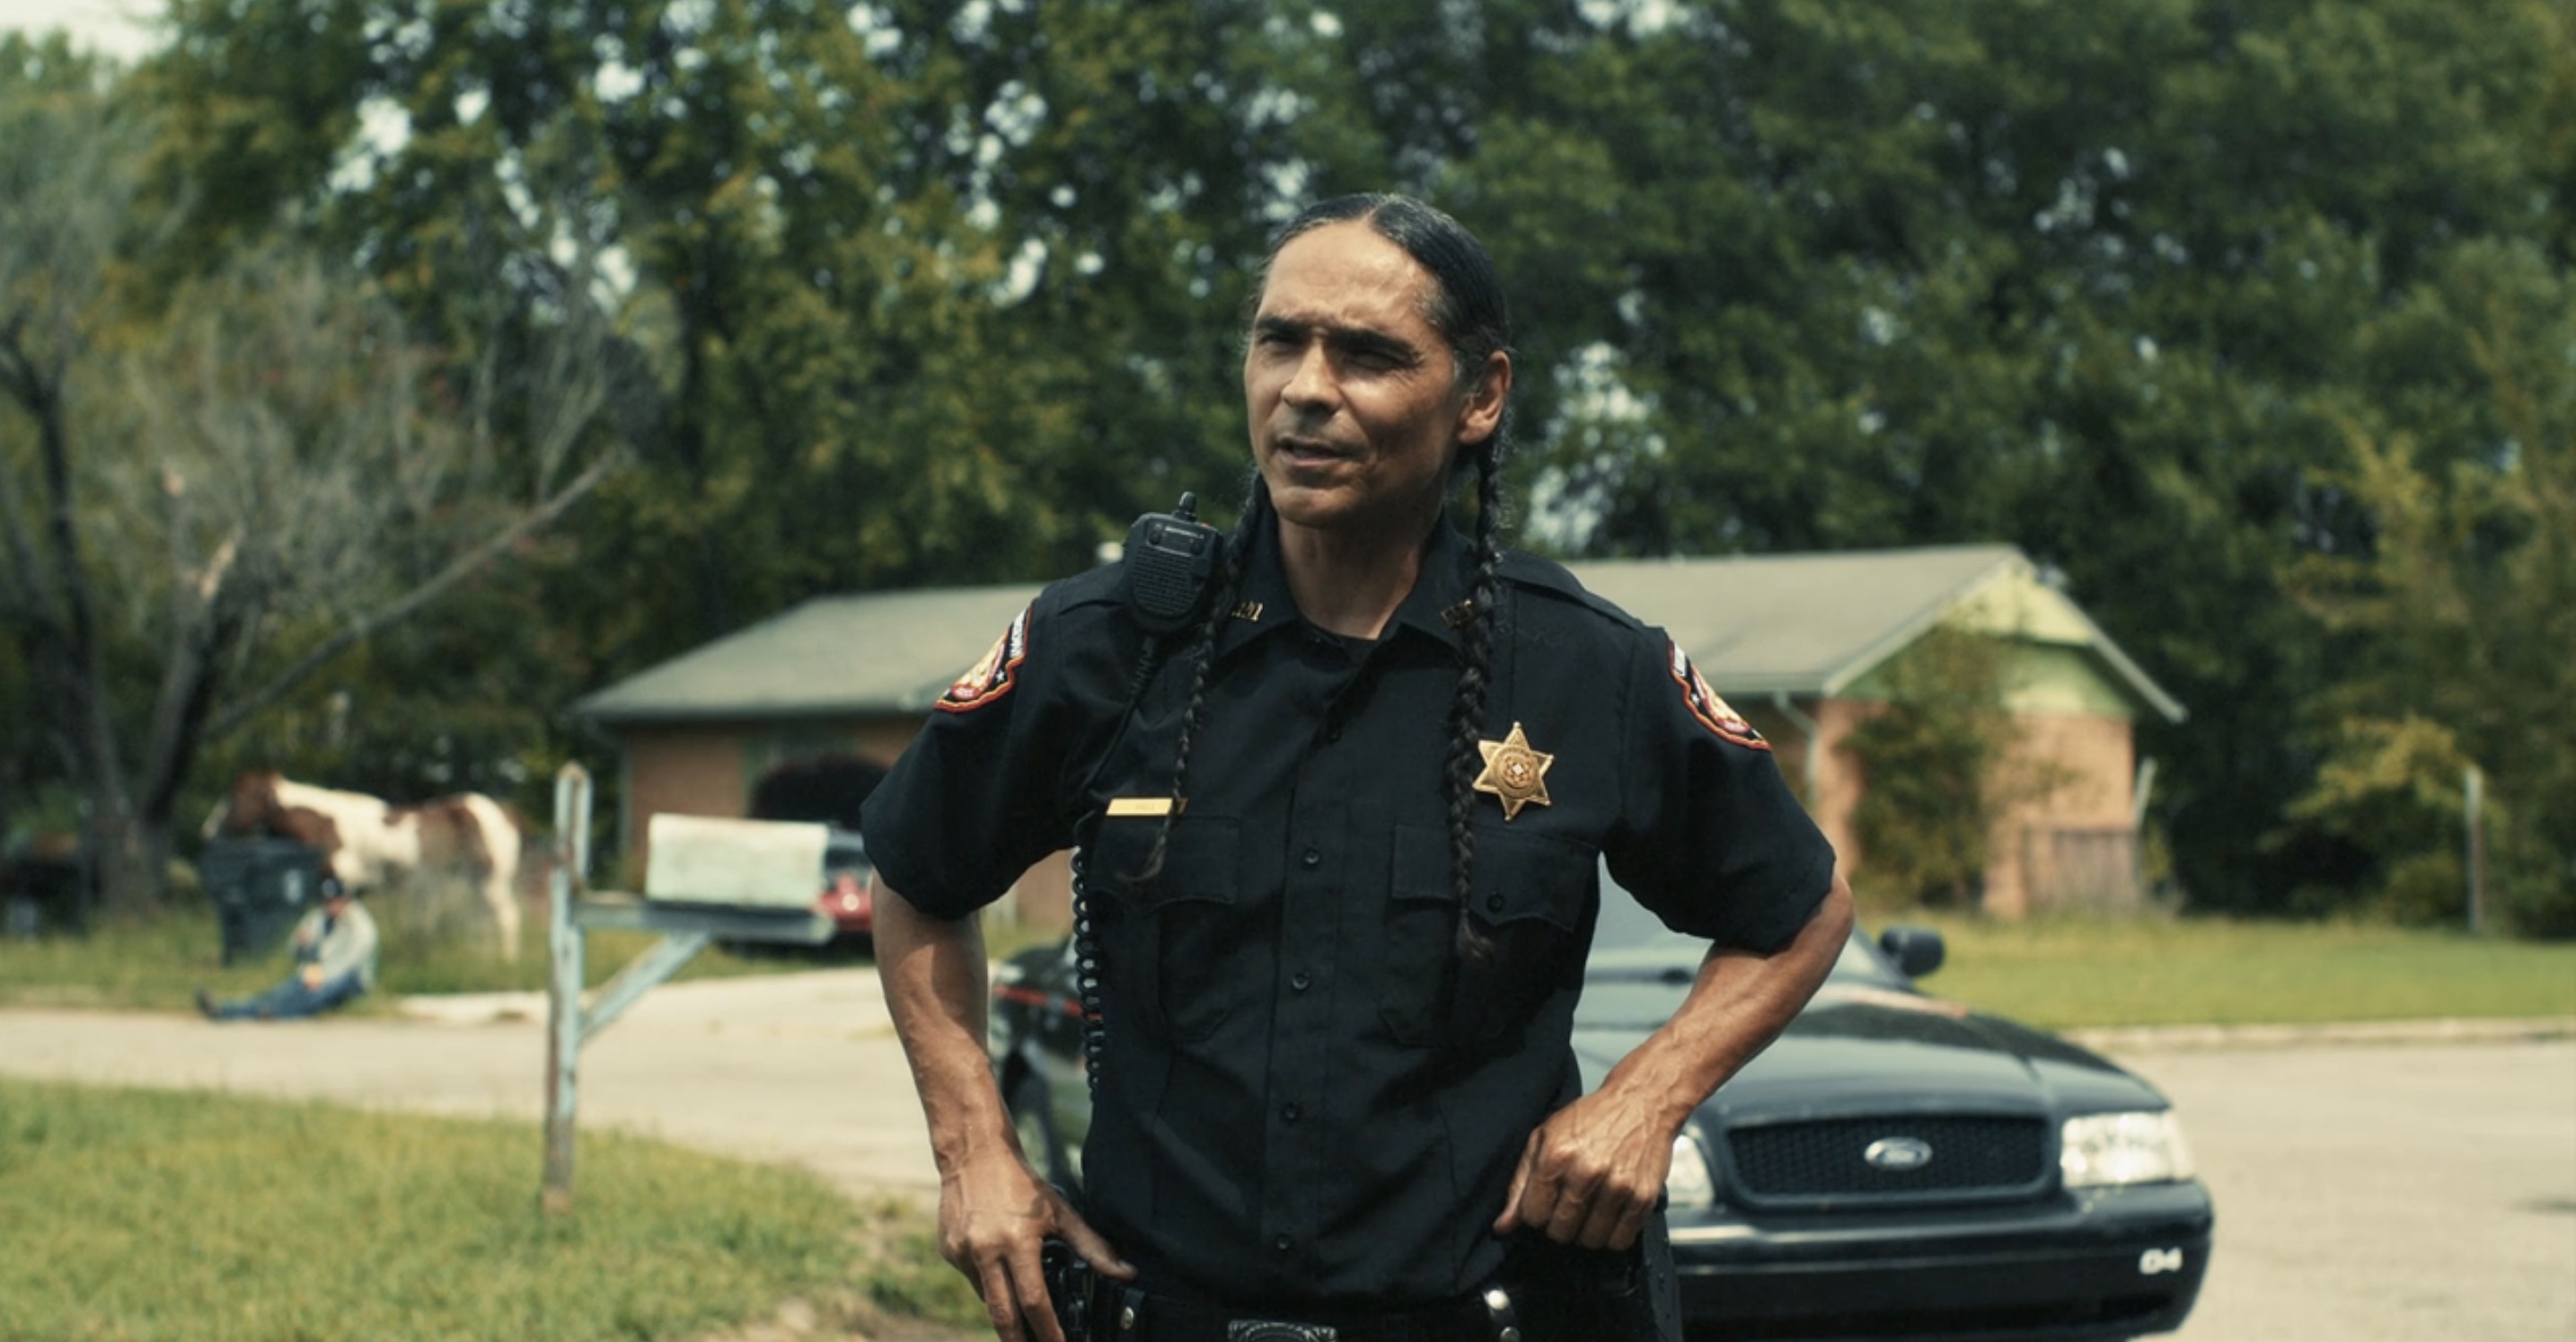 Reservation Dogs Cast - Zahn McClarnon as Officer Big